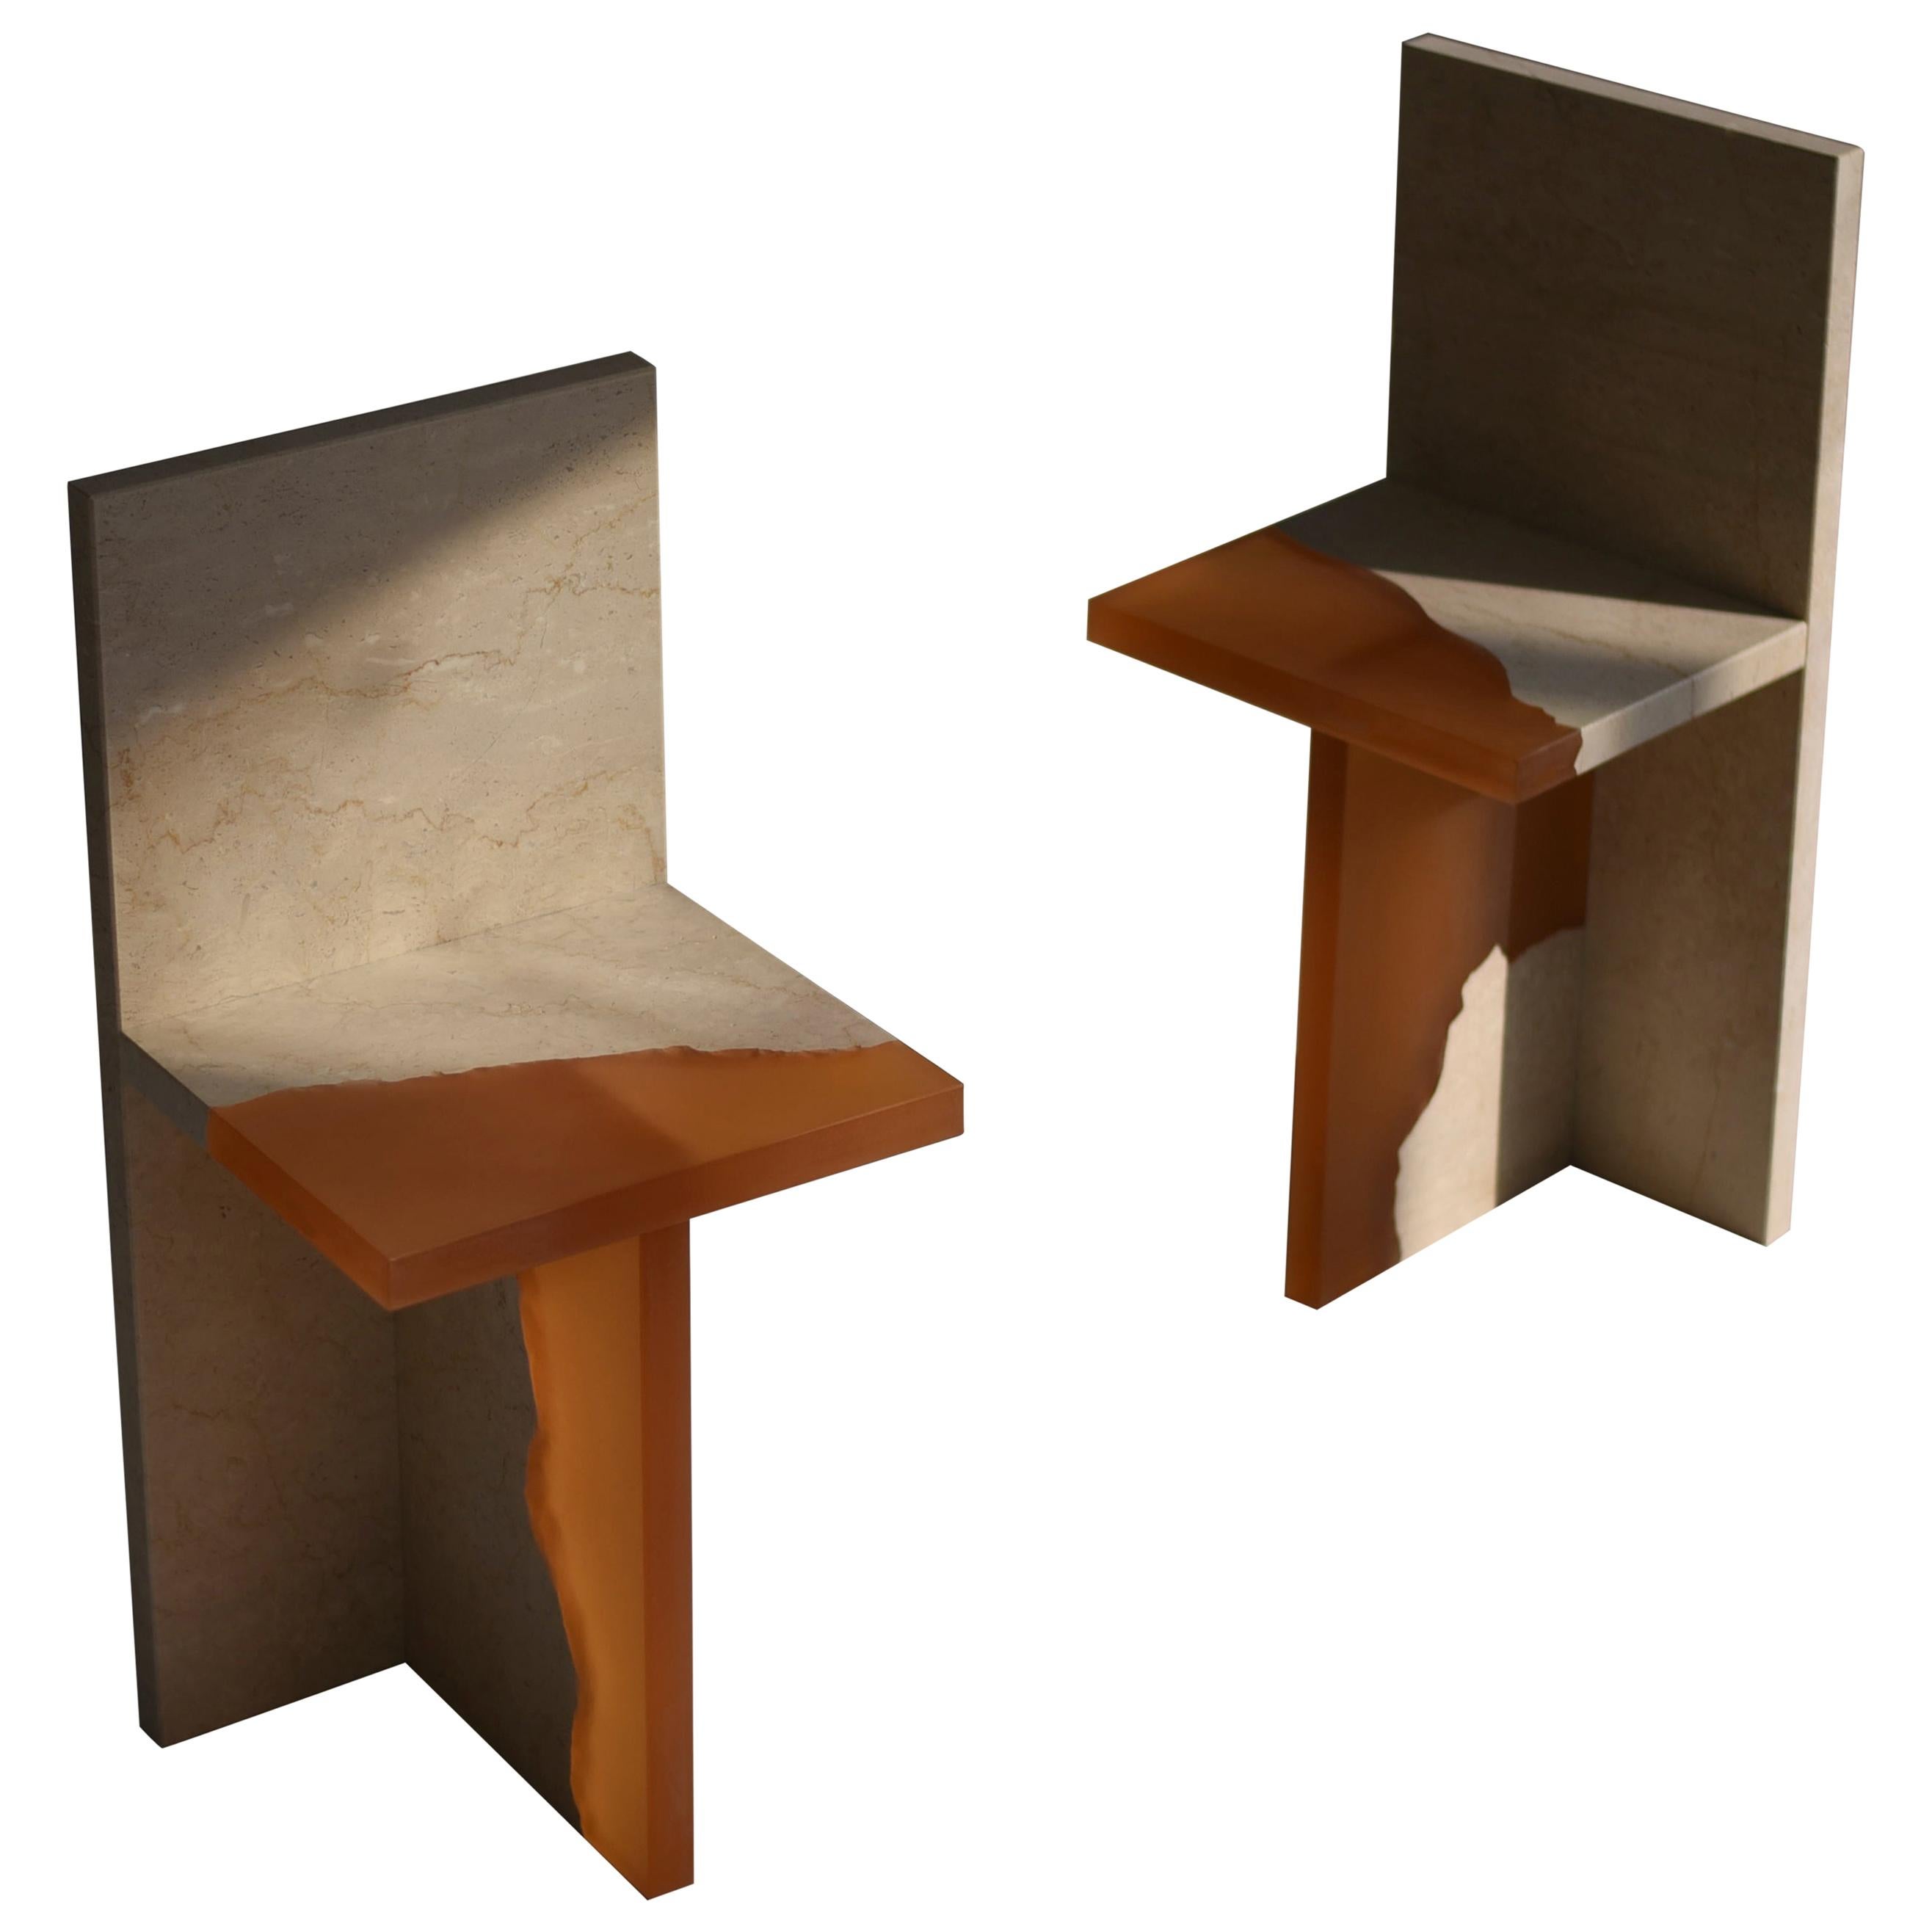 Pair of Crystal Resin and Marble, Fragment Chair, Jang Hea Kyoung